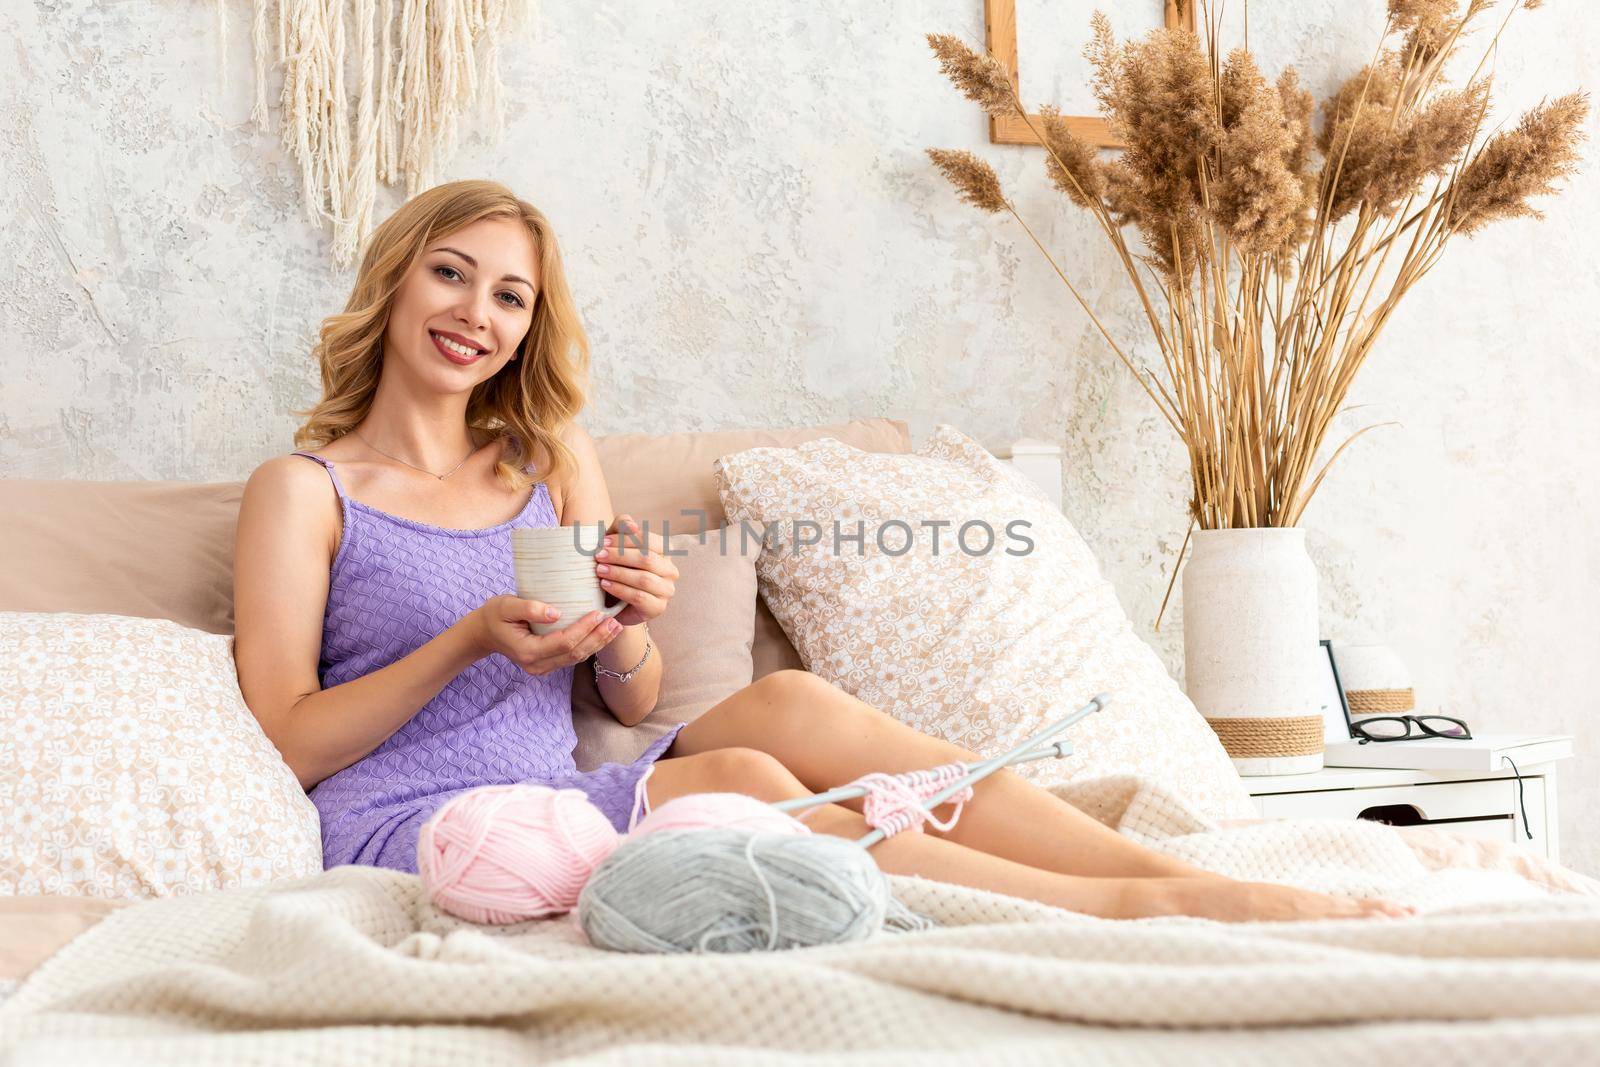 Young woman holding a mug with tea or coffee sitting on the bed in the bedroom. Near lie yarn and knitting needles. Horizontal photo. Freelance creative working and living concept.